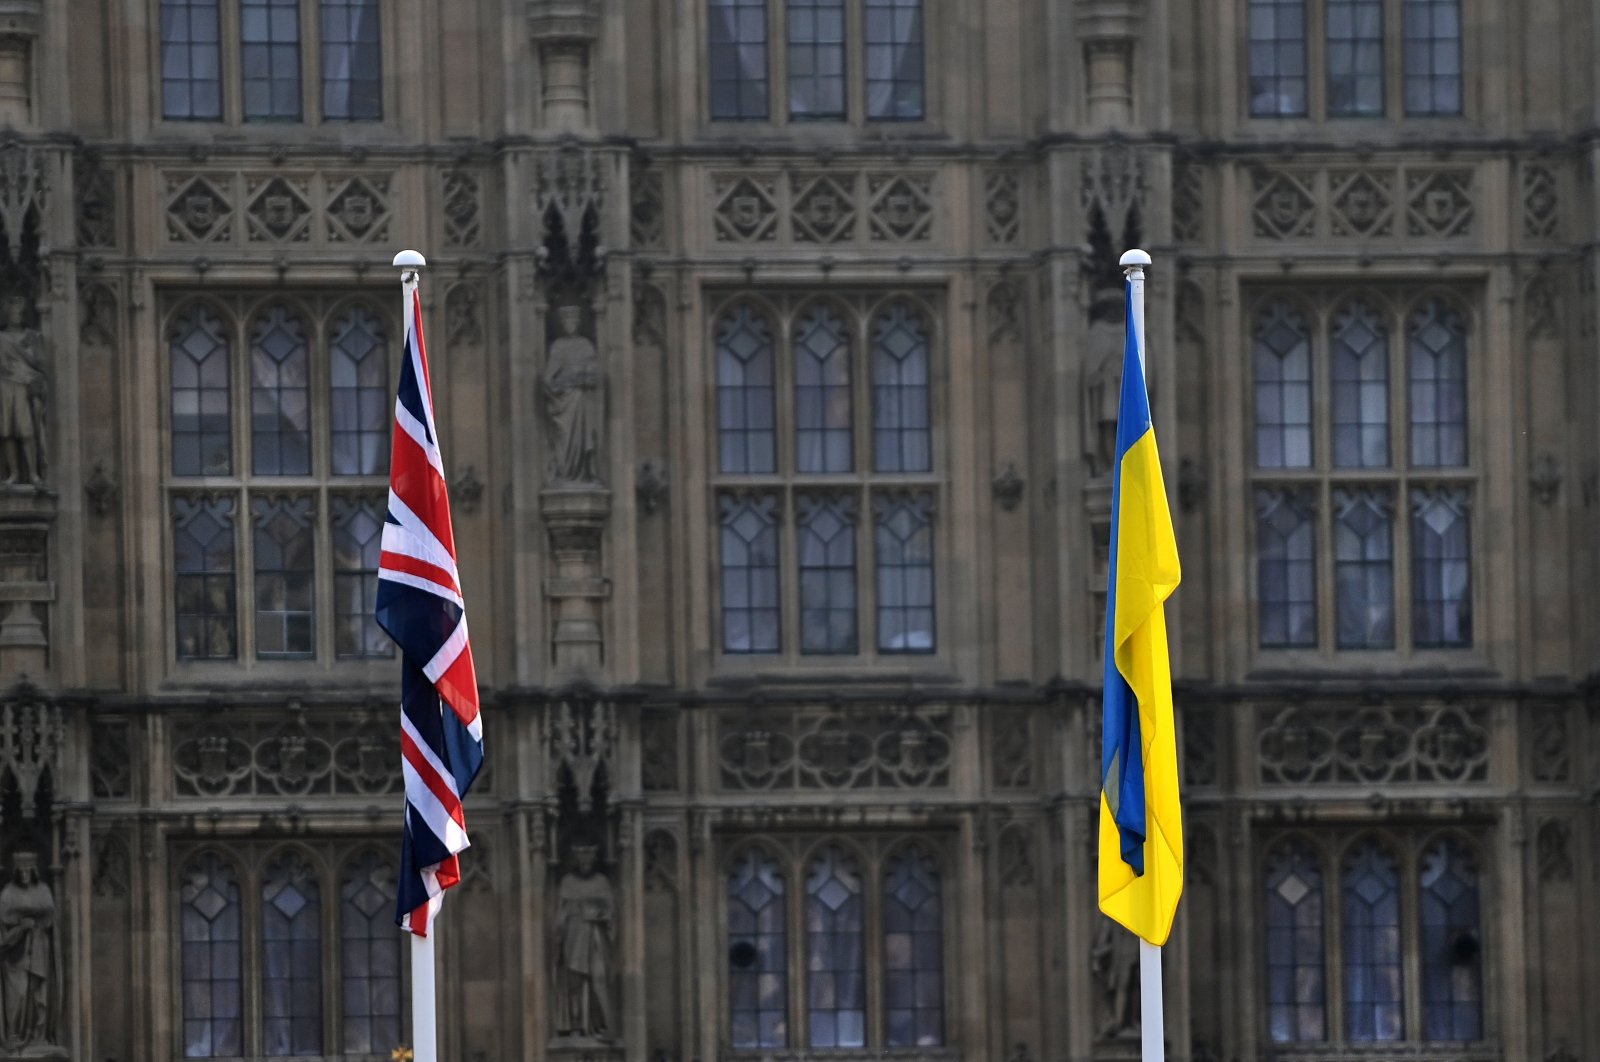 A British and a Ukrainian flag outside parliament in London, Britain, March 3, 2022. (EPA Photo)